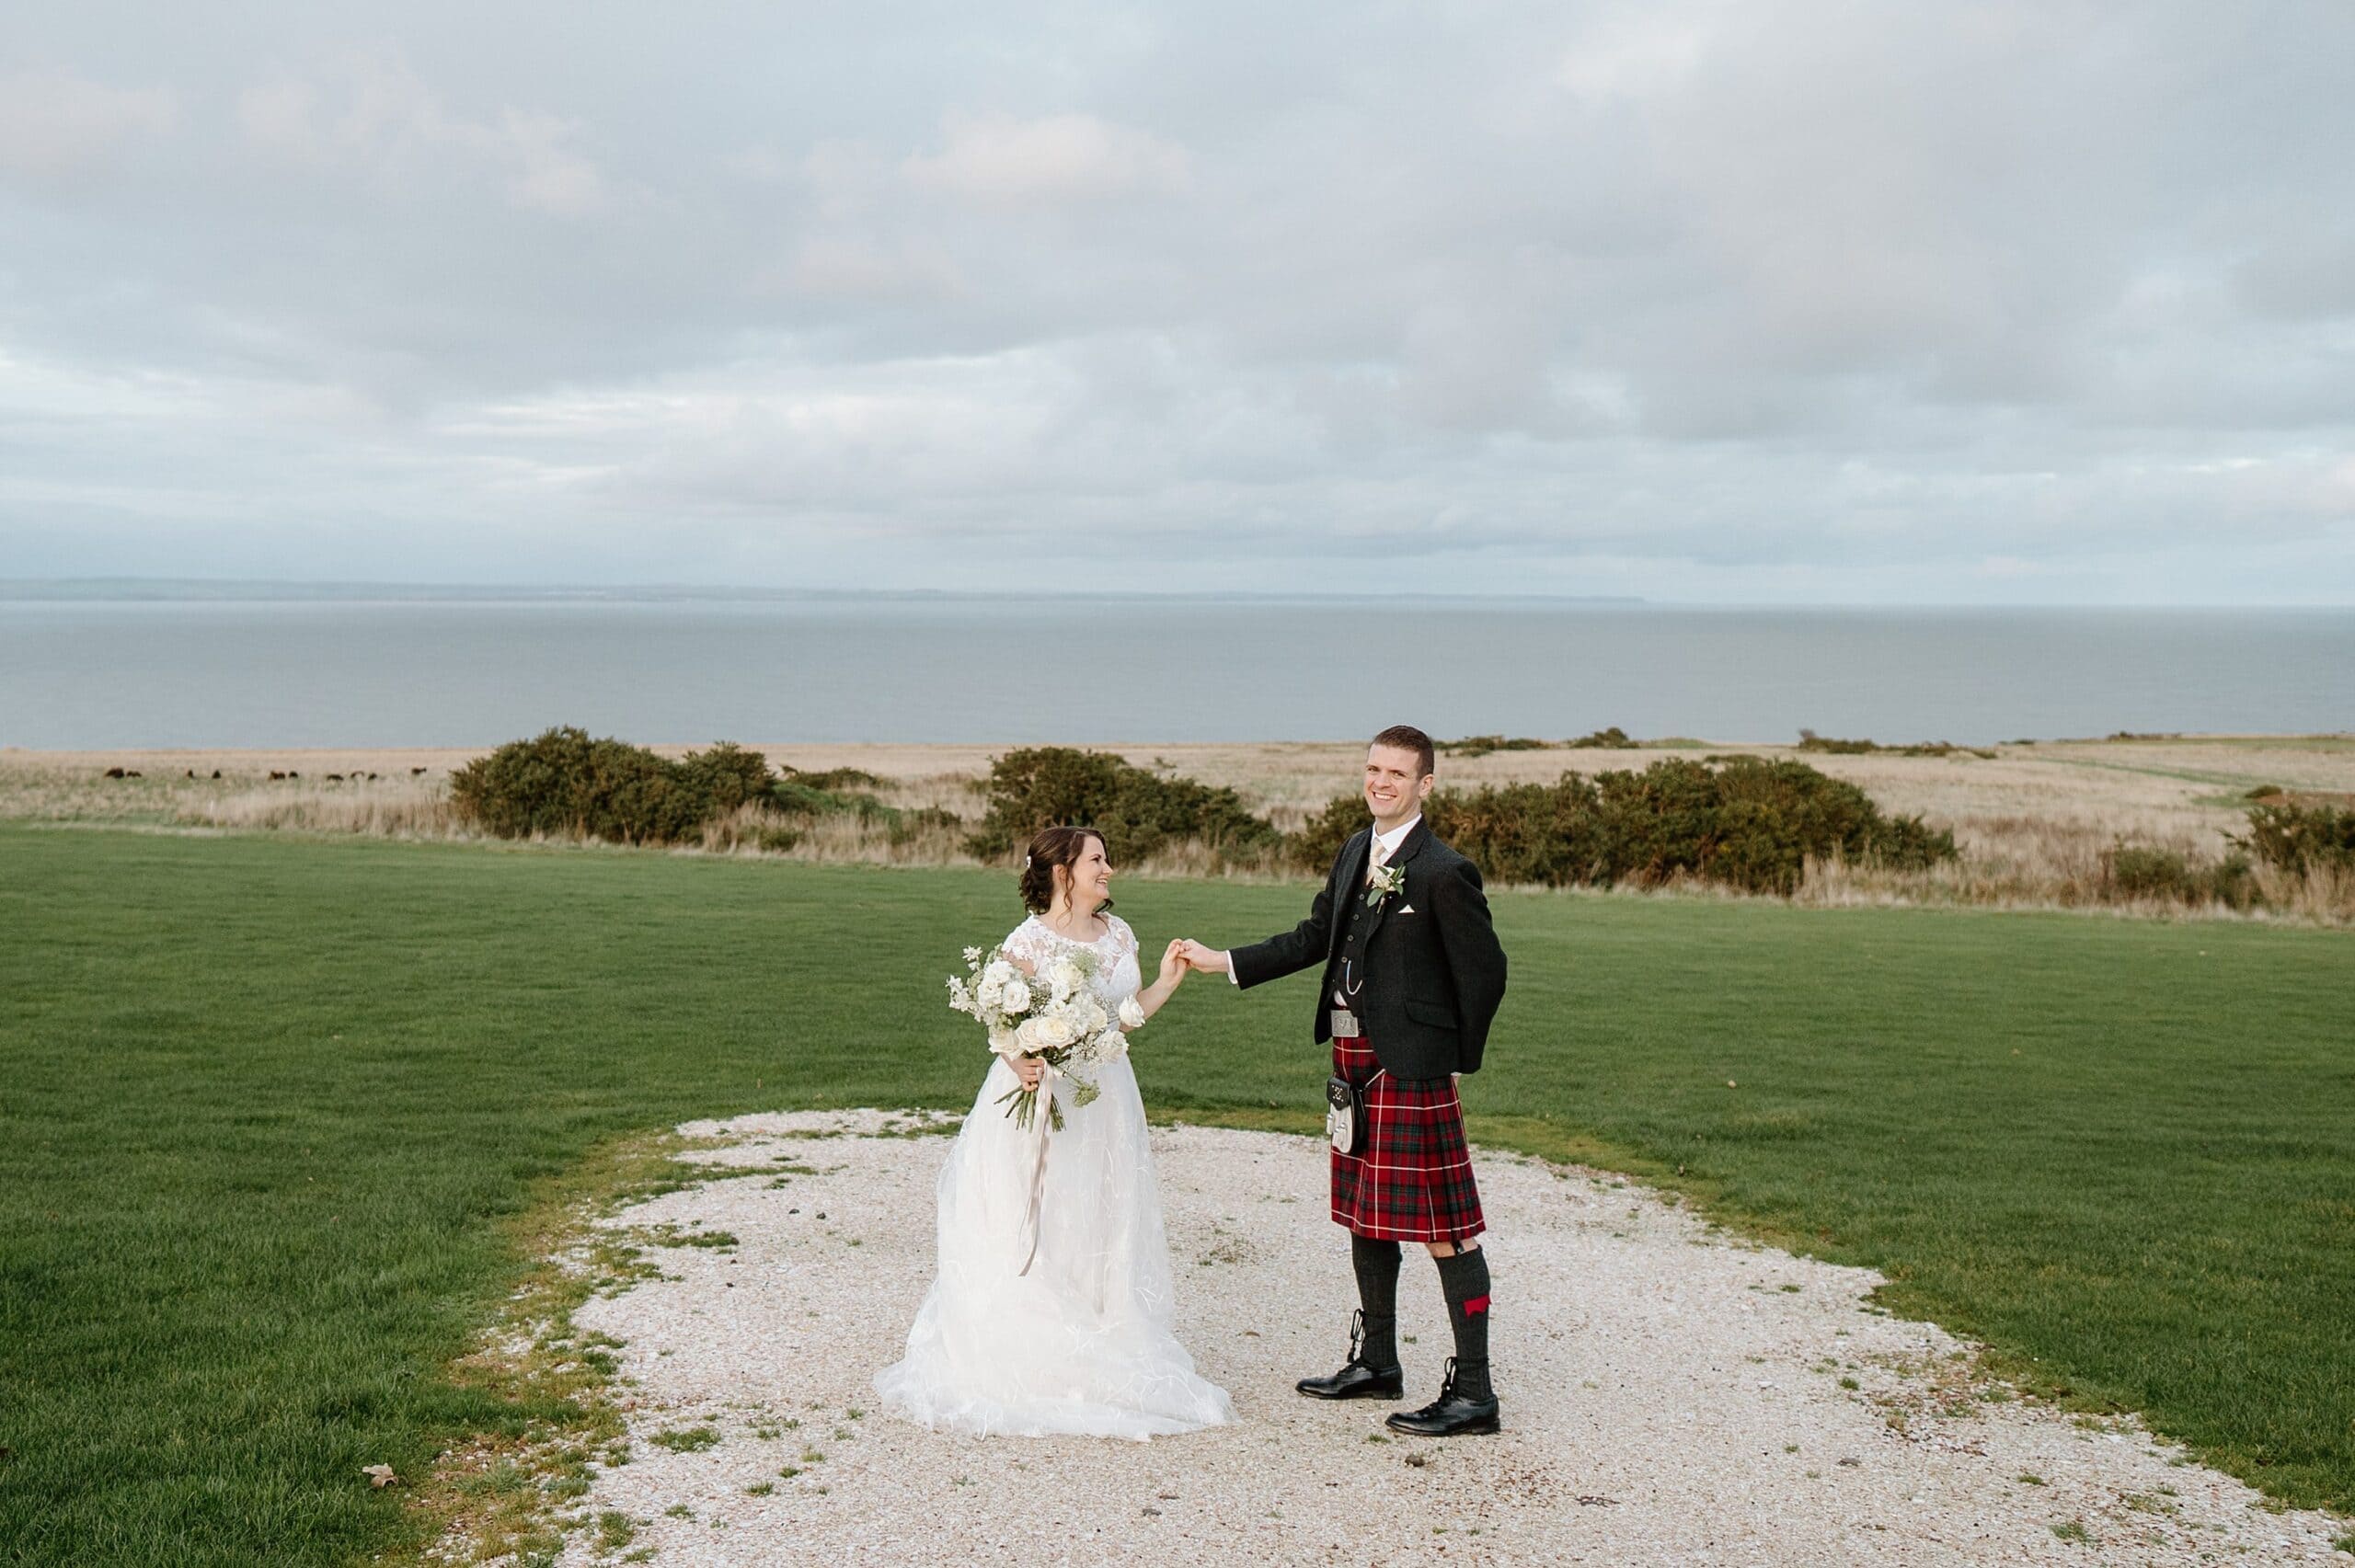 kinkell byre wedding photos of bride and groom outside venue with beach in the background